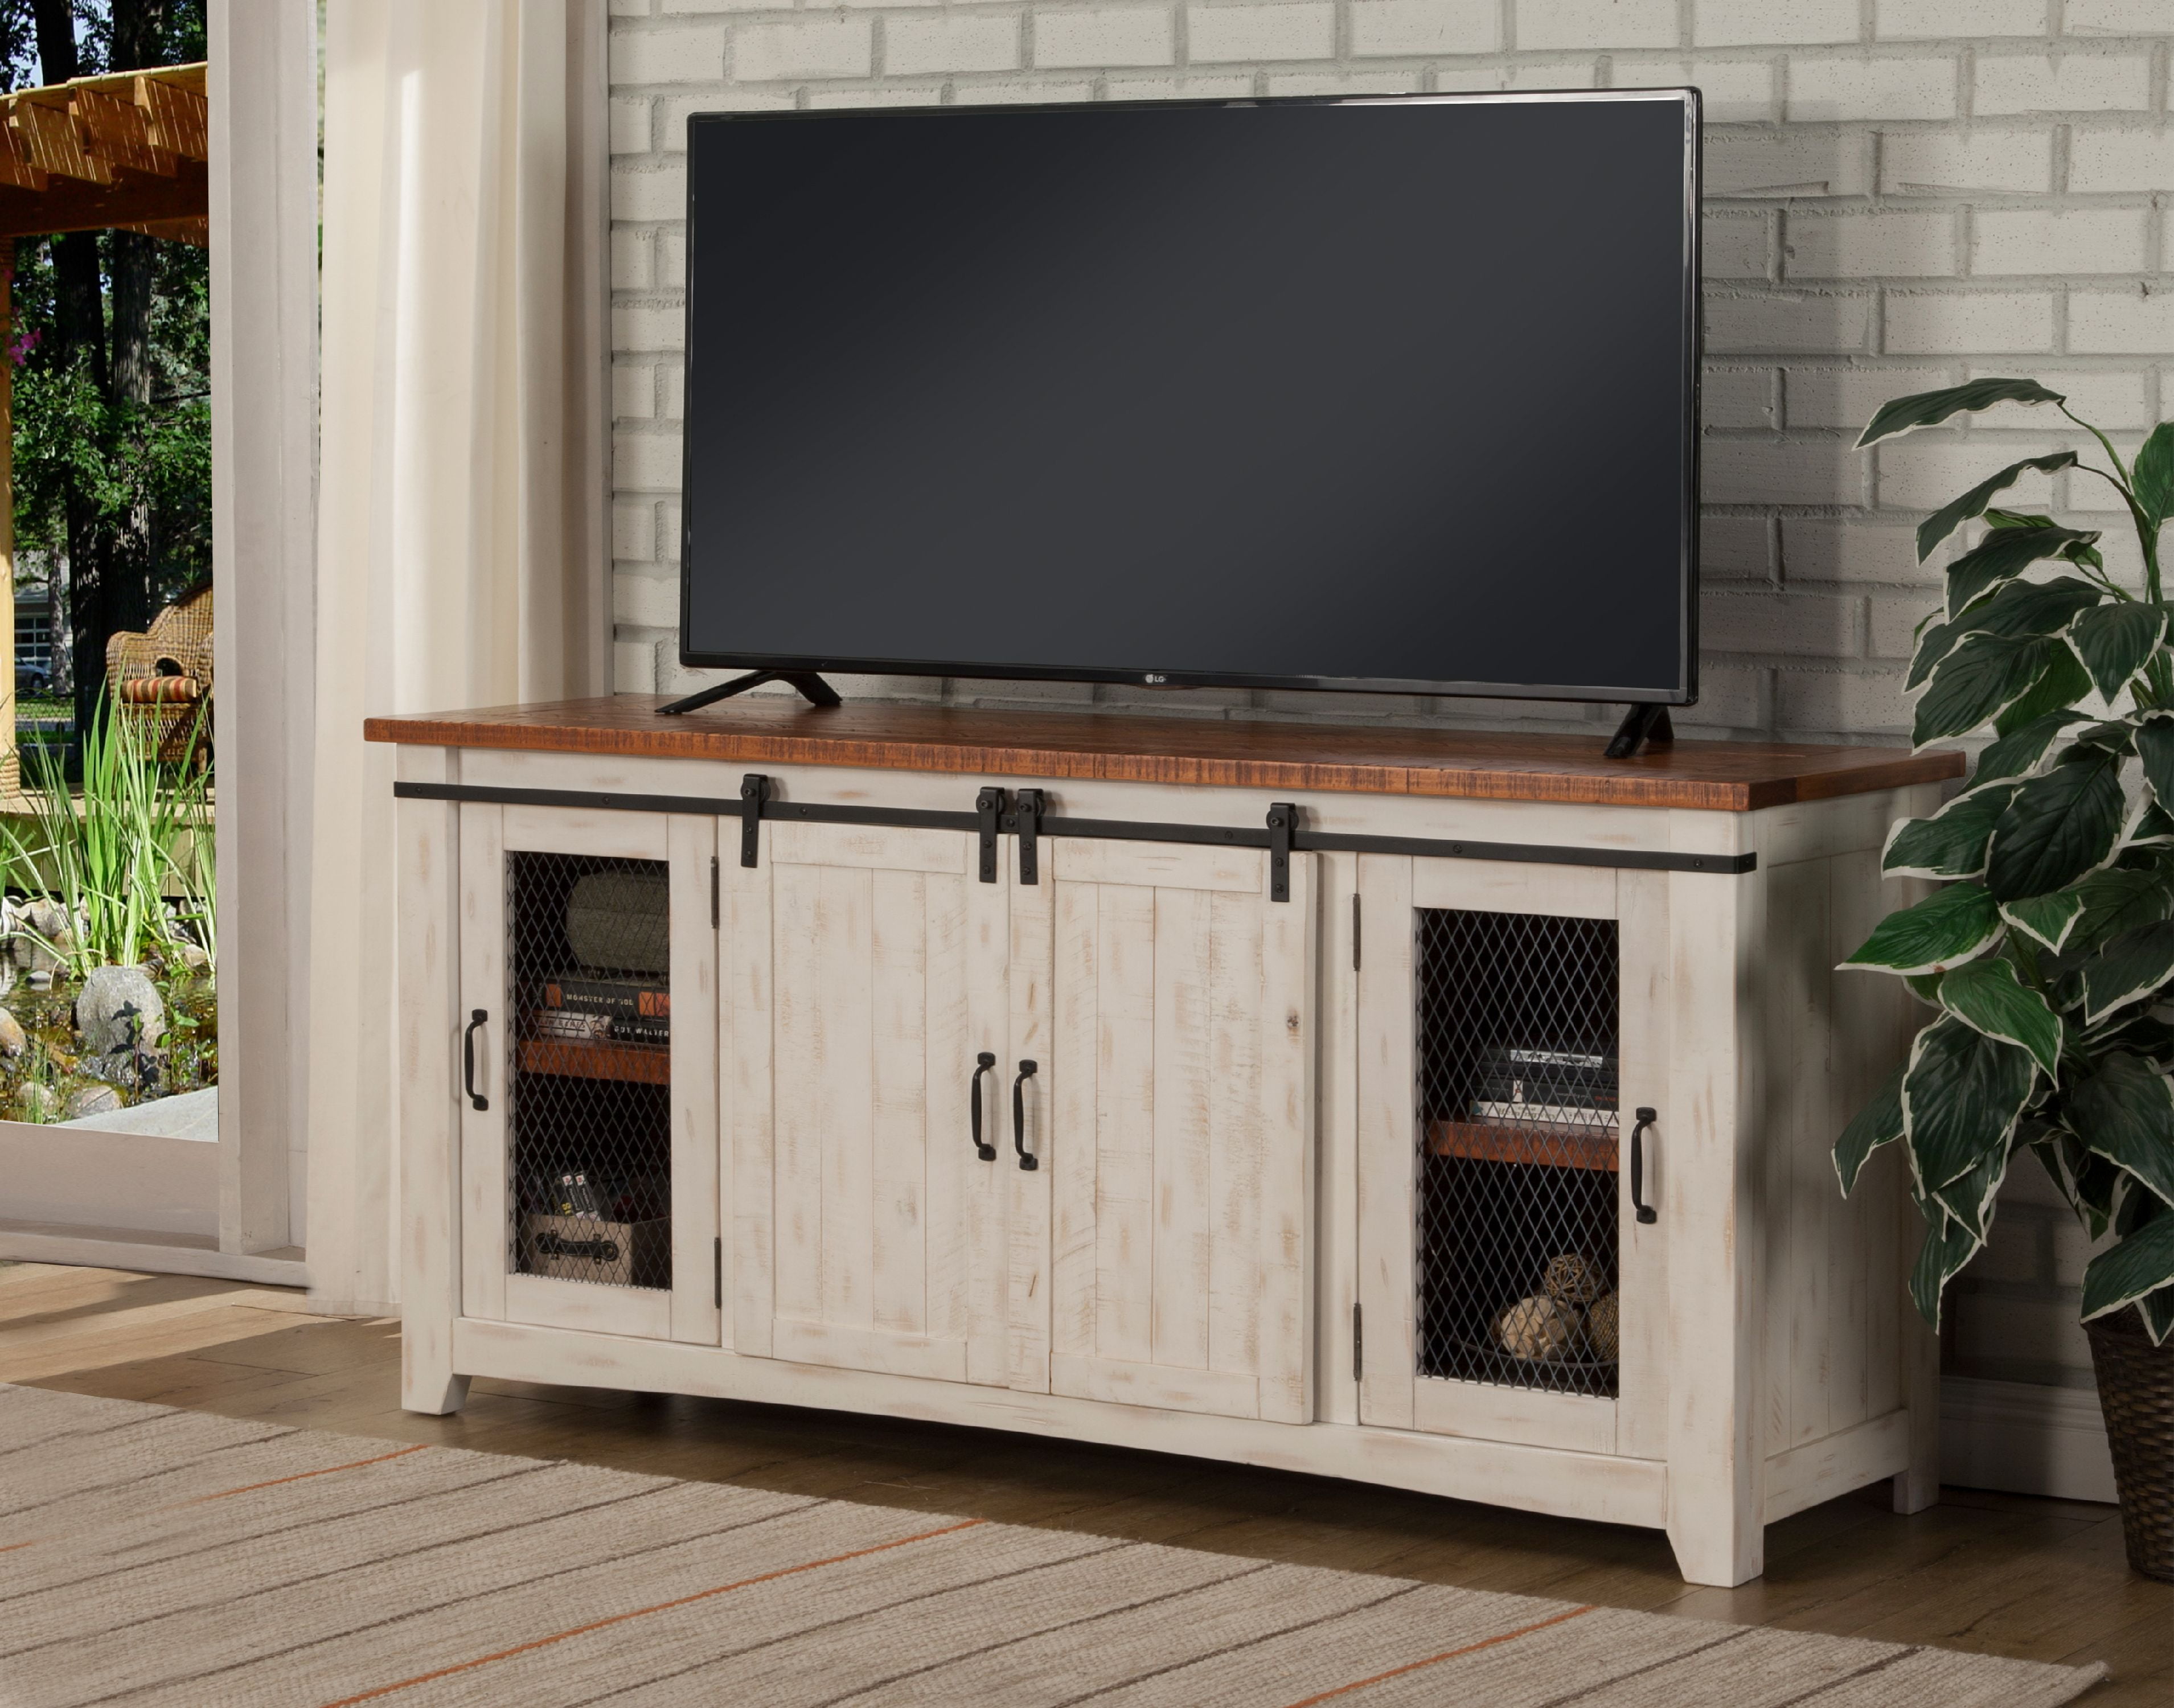 Dual Tone Wood and Metal TV Stand With 2 Mesh Style Doors, White and Brown-  Saltoro Sherpi 